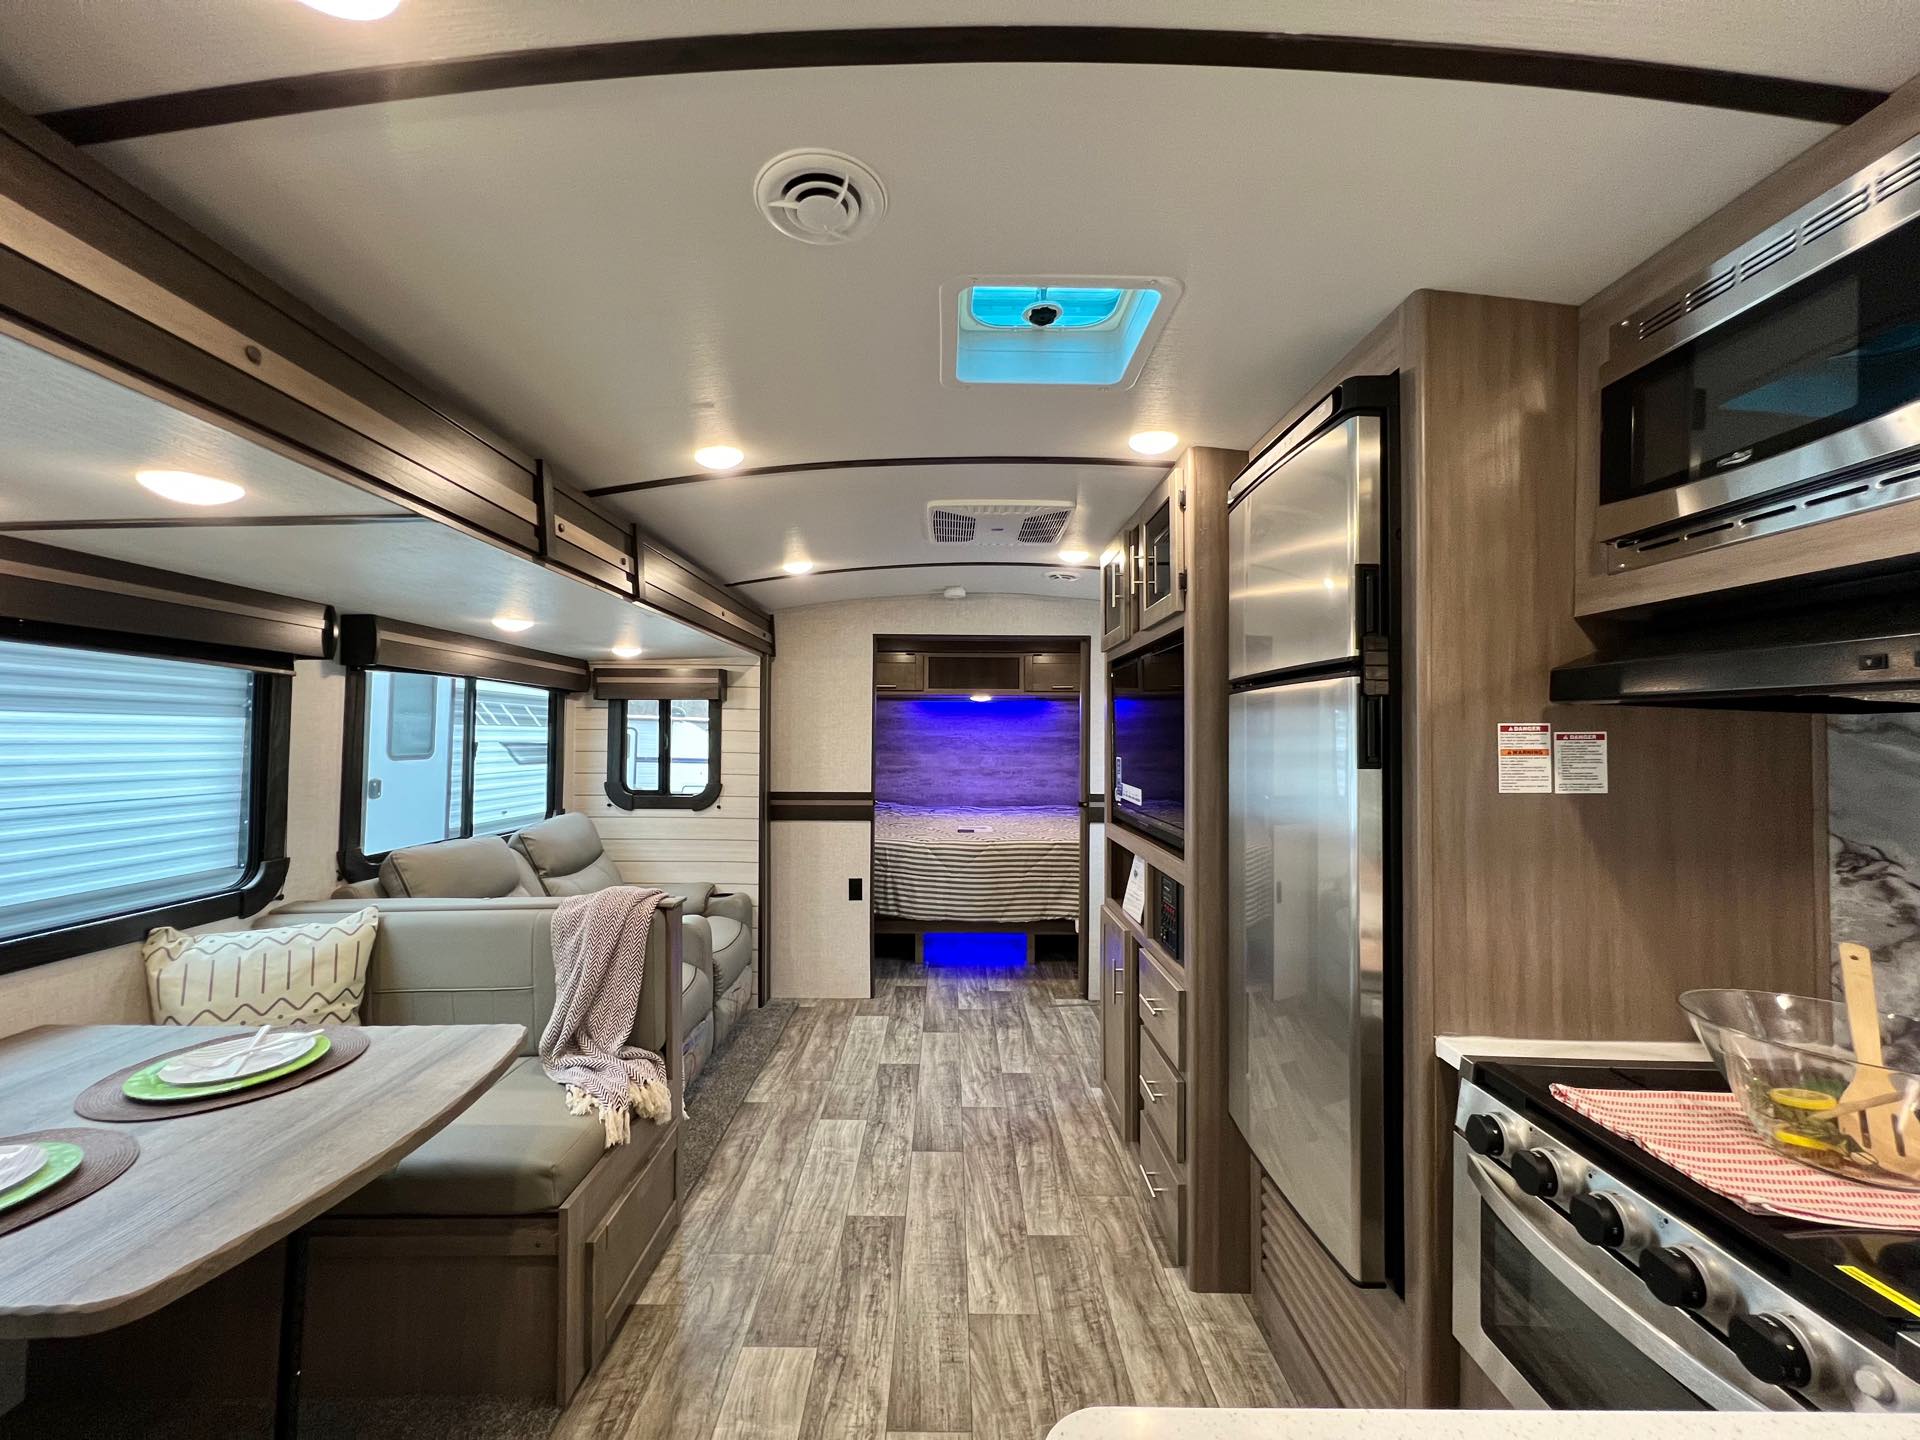 2022 CrossRoads Sunset Trail Super Lite SS253RB at Lee's Country RV